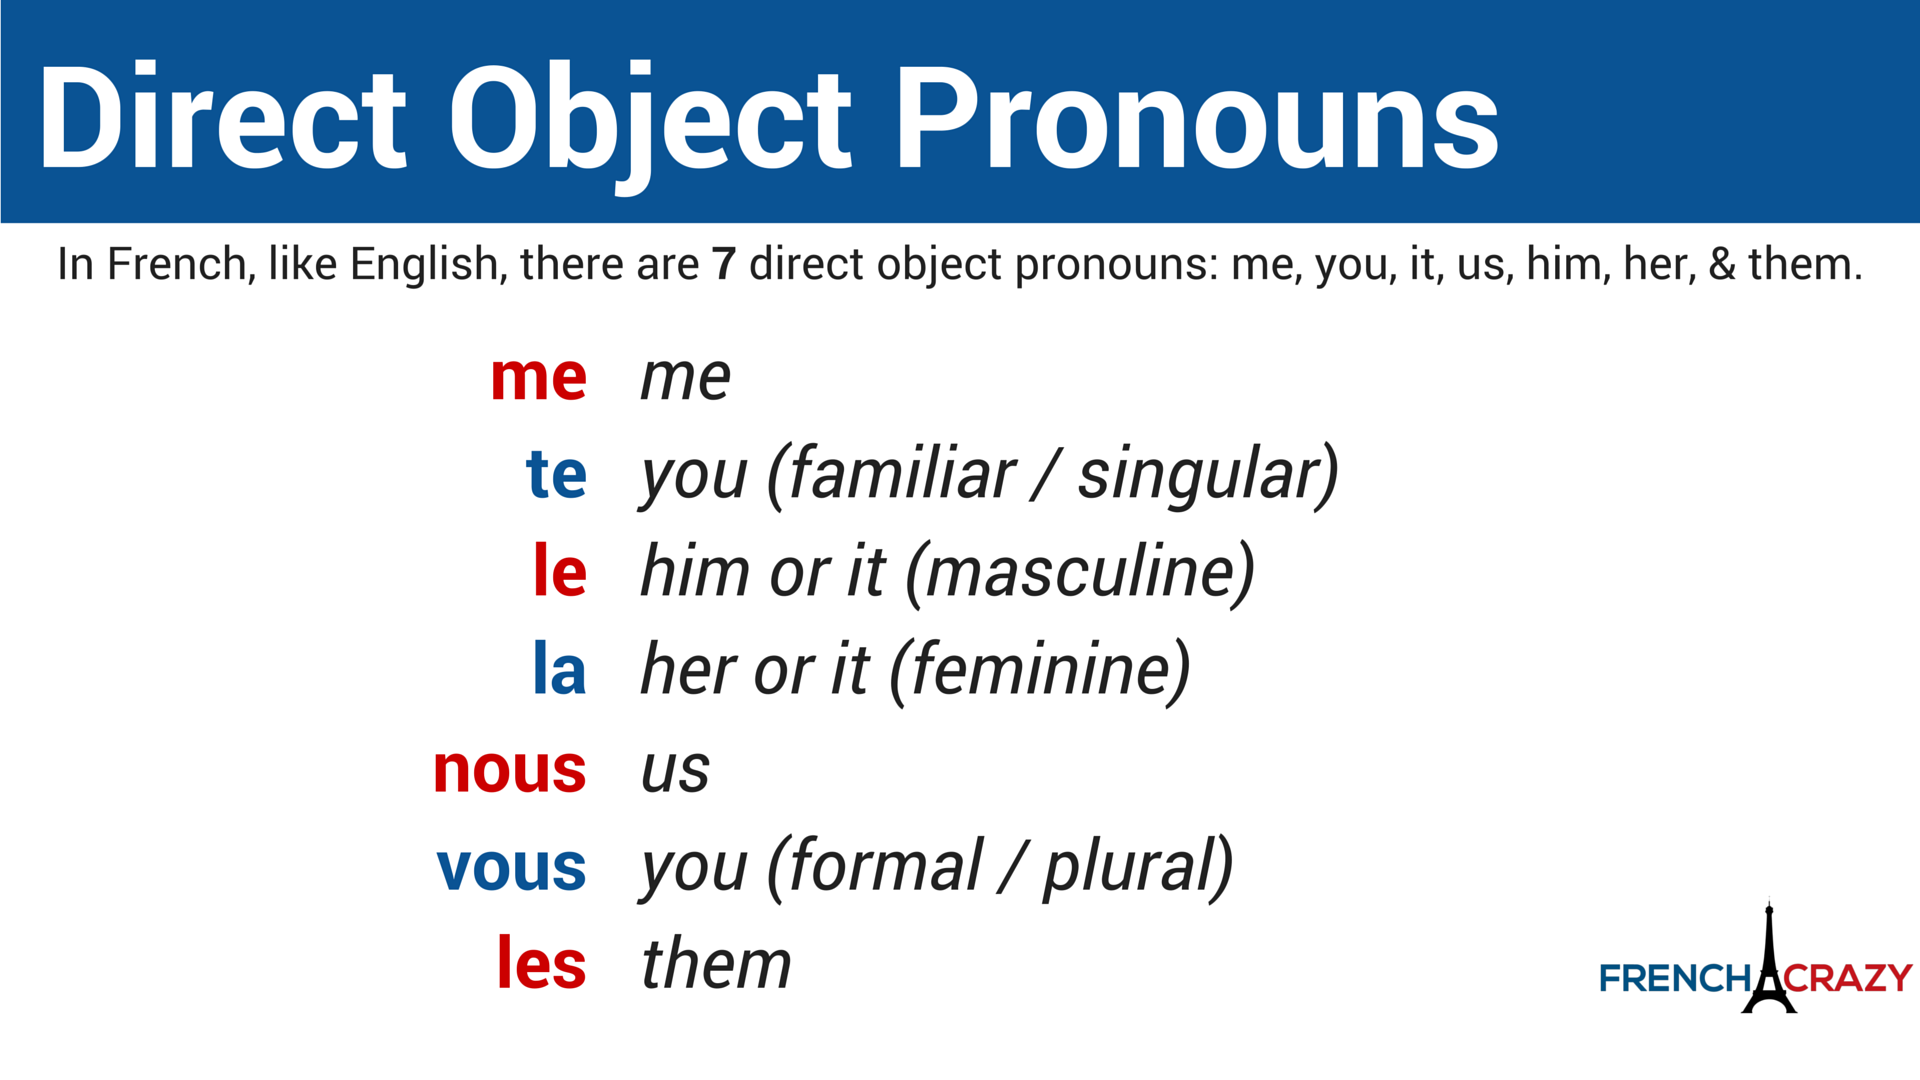 Direct Object Pronouns Example